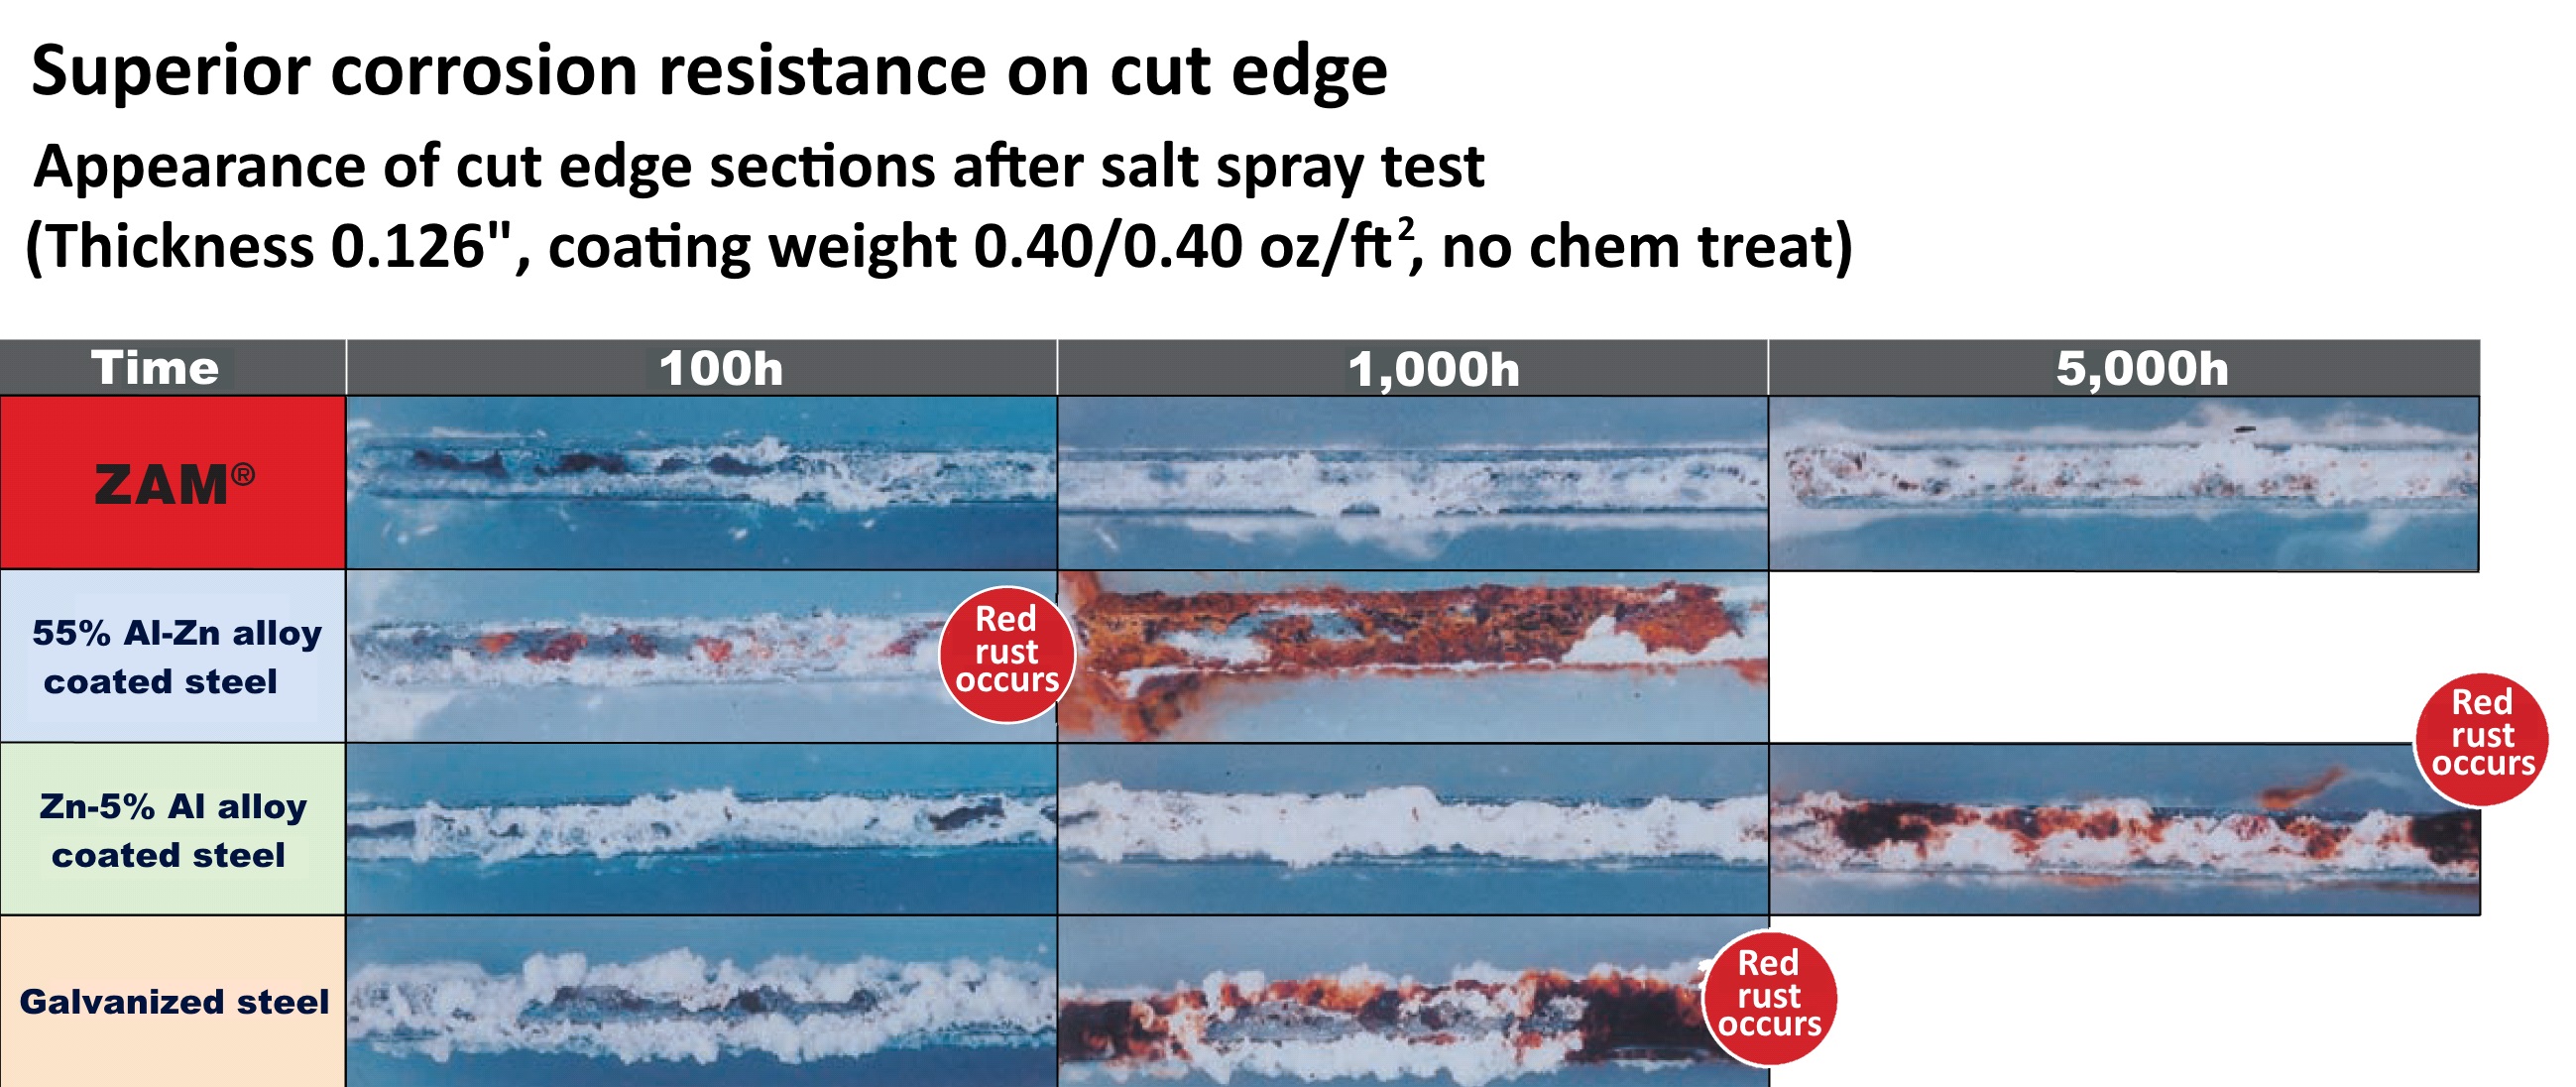 Photos showing superior corrosion resistance on cut edge of ZAM® over time after salt spray test